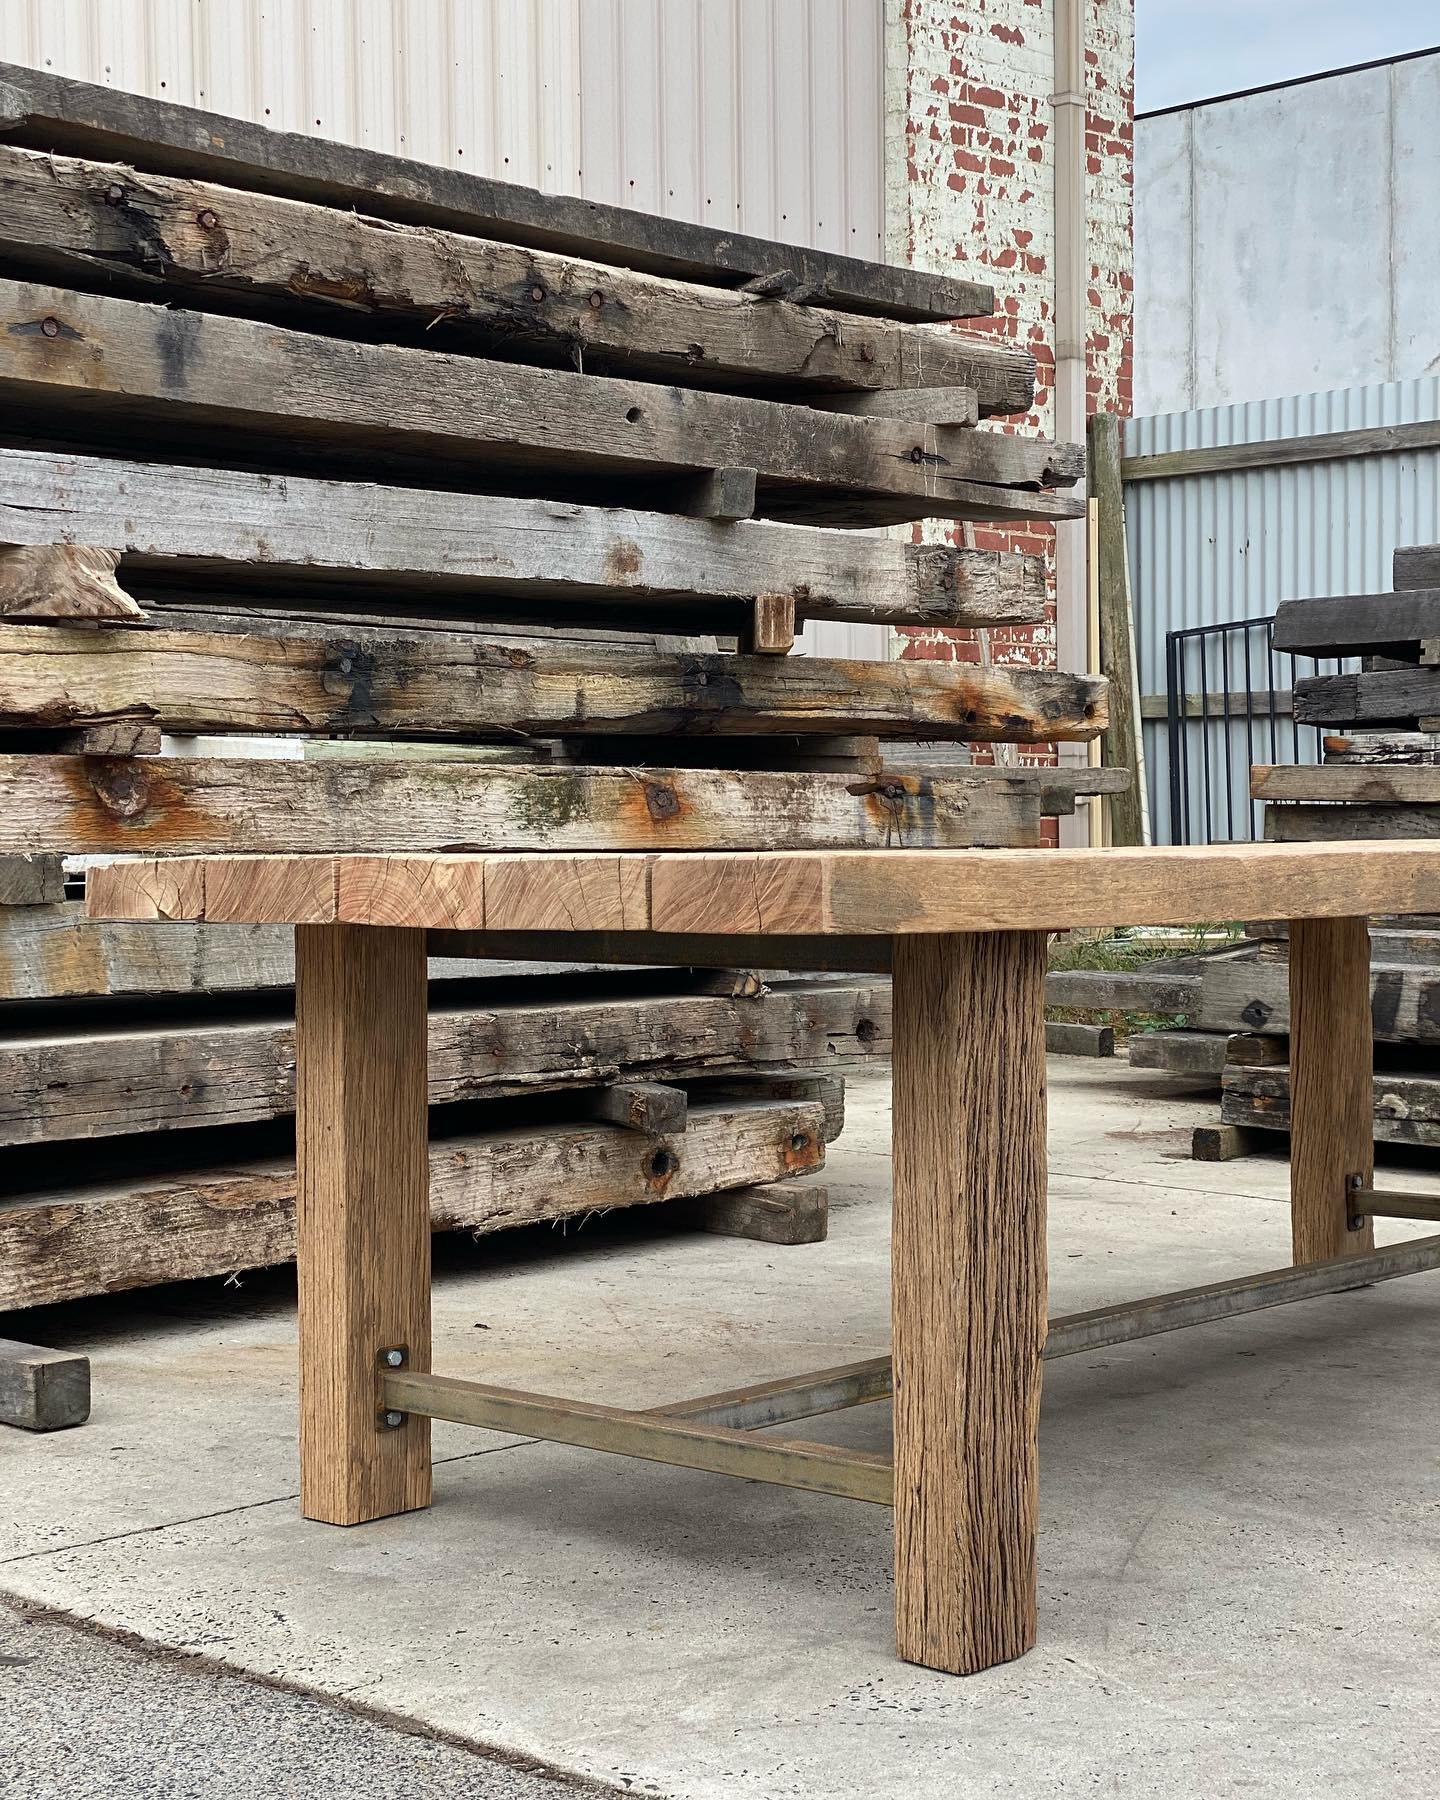 An outdoor table made with timber salvaged from St Kilda pier. 👍⚒️🌳